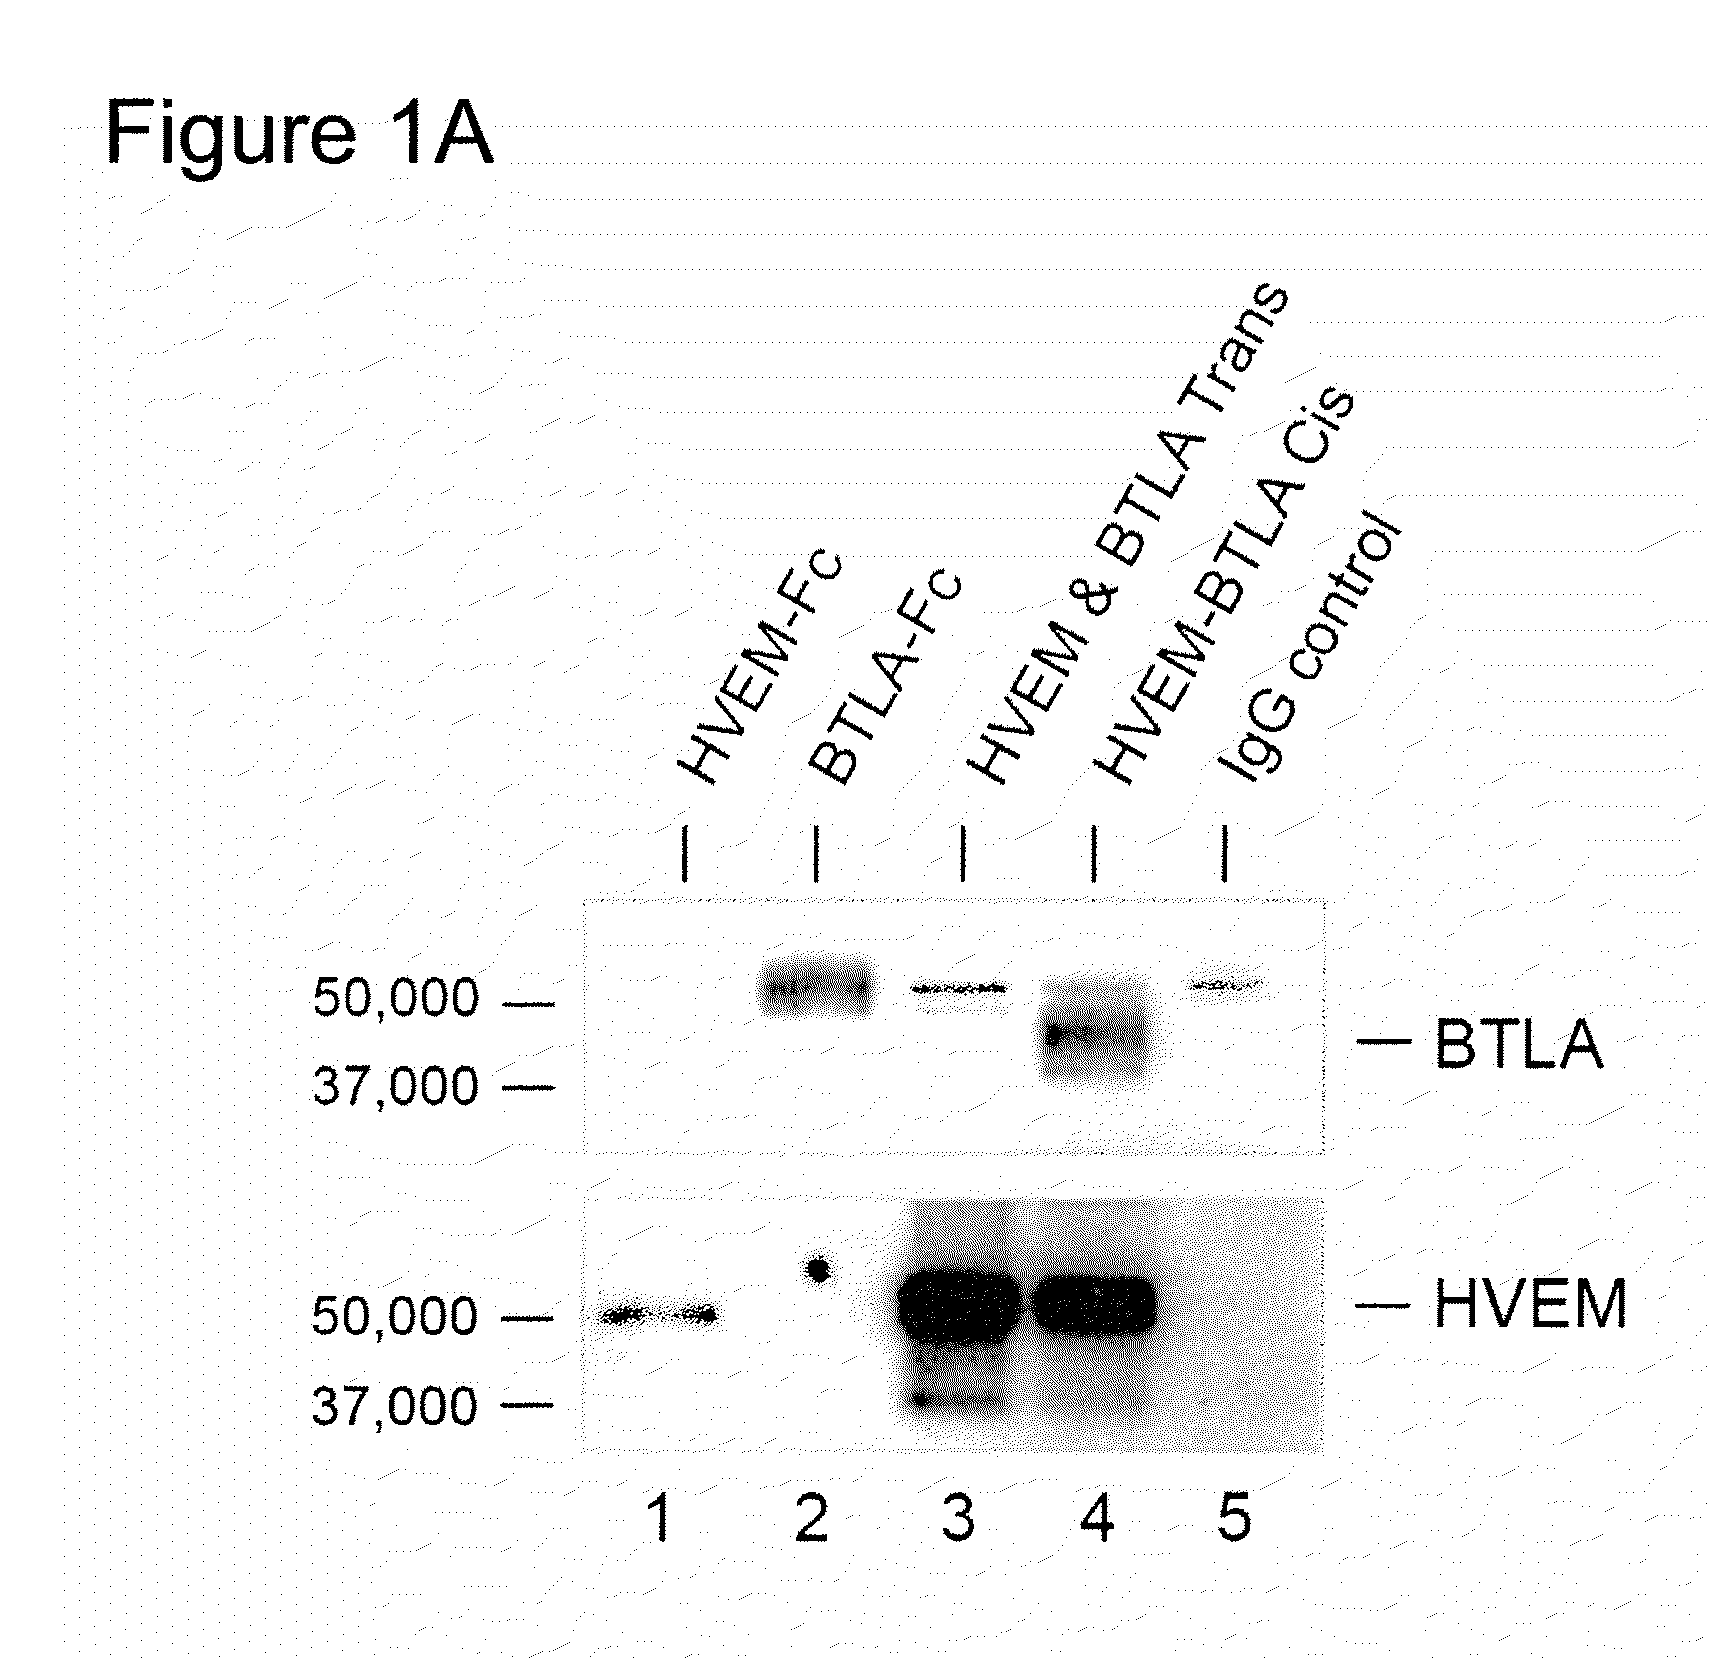 Methods of modulating hvem, btla and cd160 cis complex response or signaling activity with soluble light polypeptide sequences